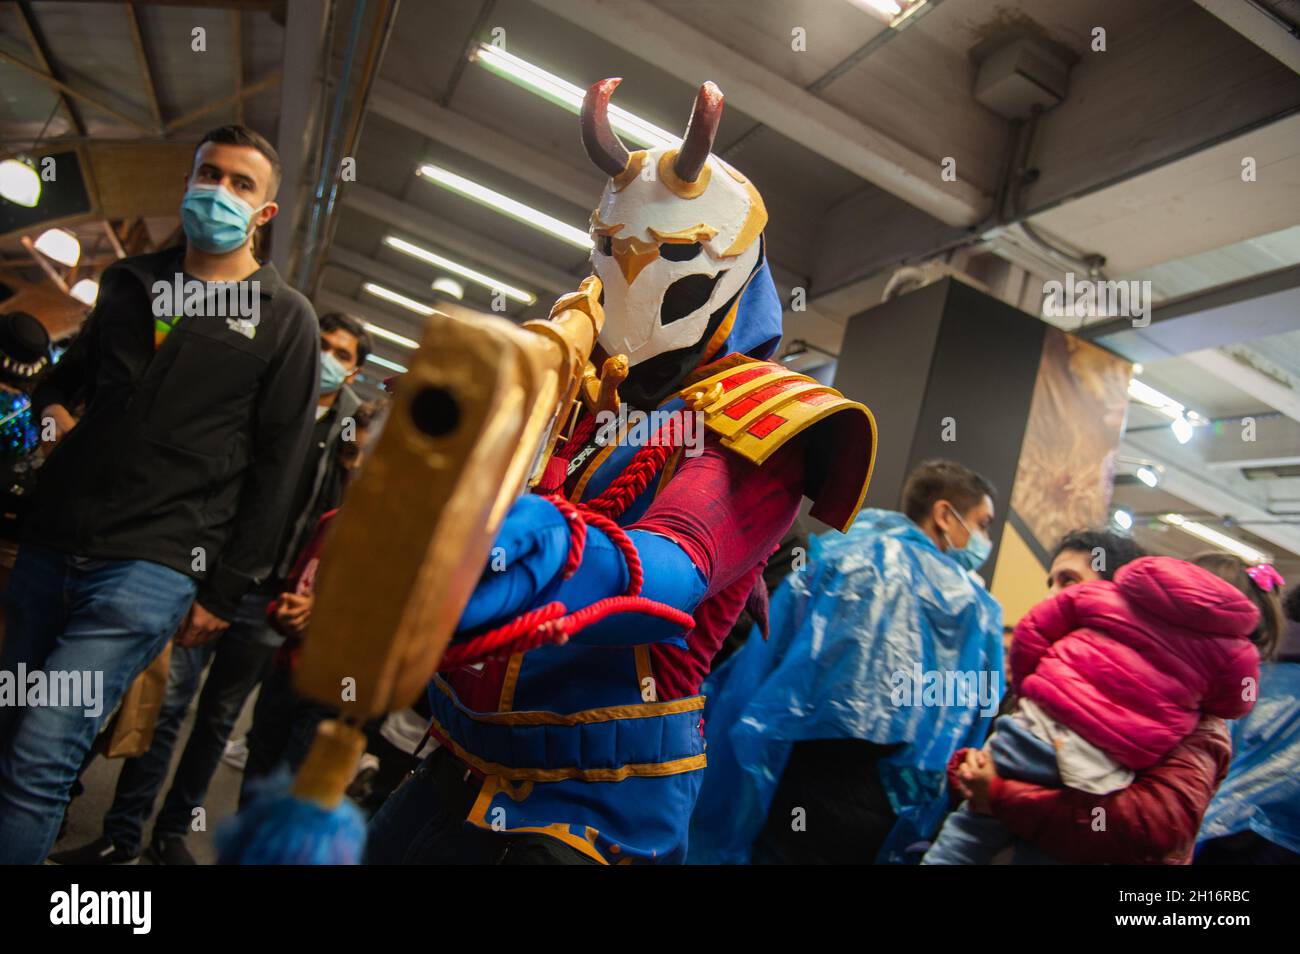 Cosplayers use costumes of League of Legends game characters during the first day of the SOFA (Salon del Ocio y la Fantasia) 2021, a fair aimed to the geek audience in Colombia that mixes Cosplay, gaming, superhero and movie fans from across Colombia, in Bogota, Colombia on October 14, 2021. Stock Photo